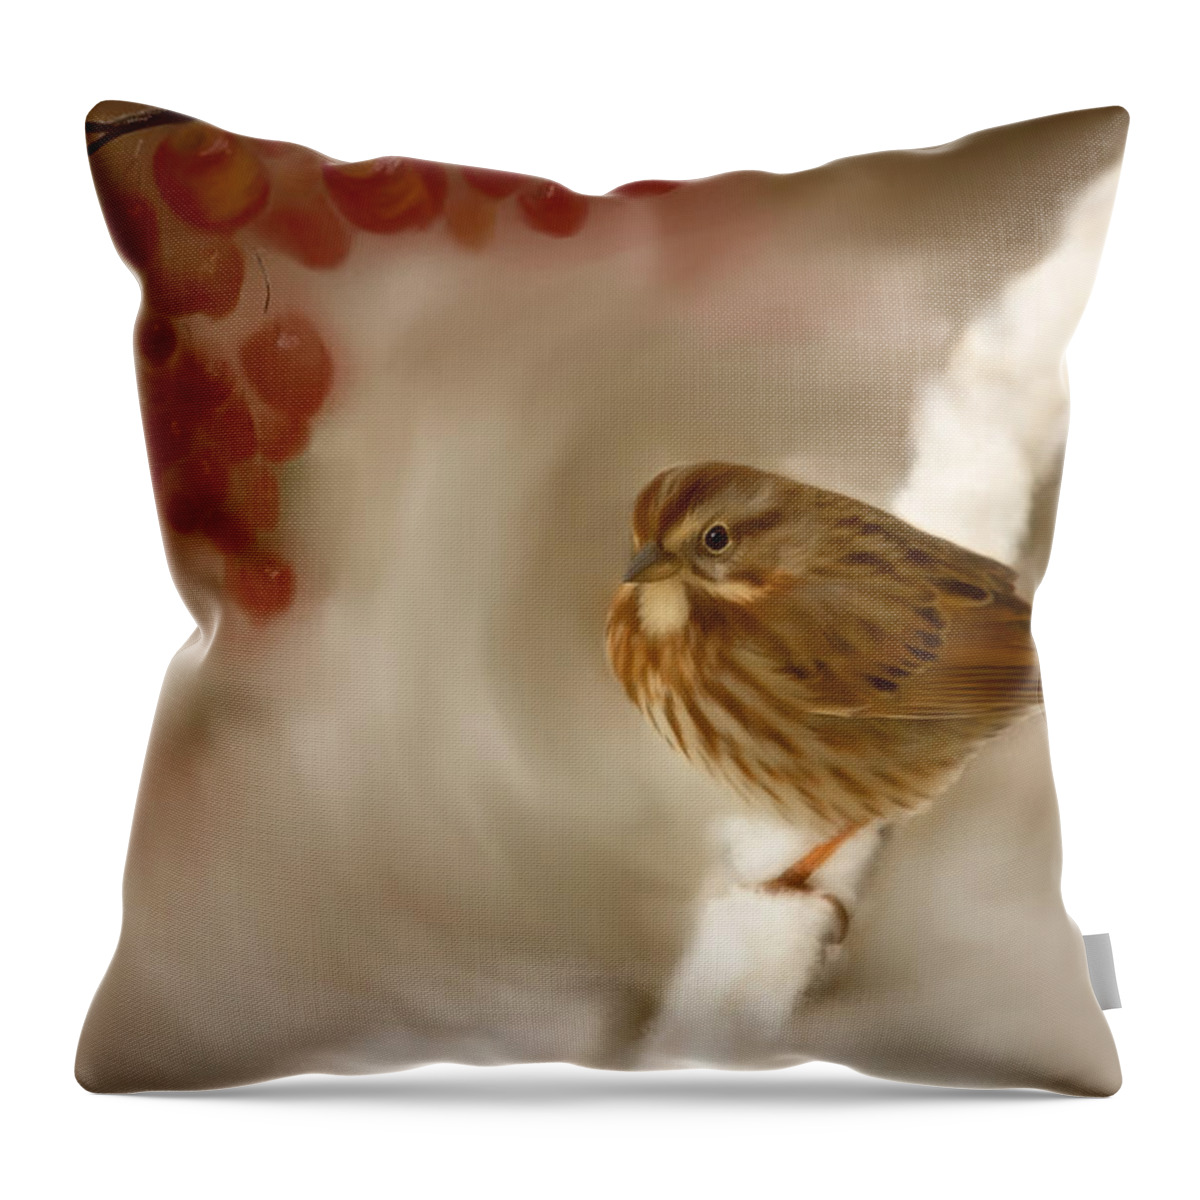 Wintertime Sparrow Throw Pillow featuring the painting Wintertime Sparrow by Beve Brown-Clark Photography